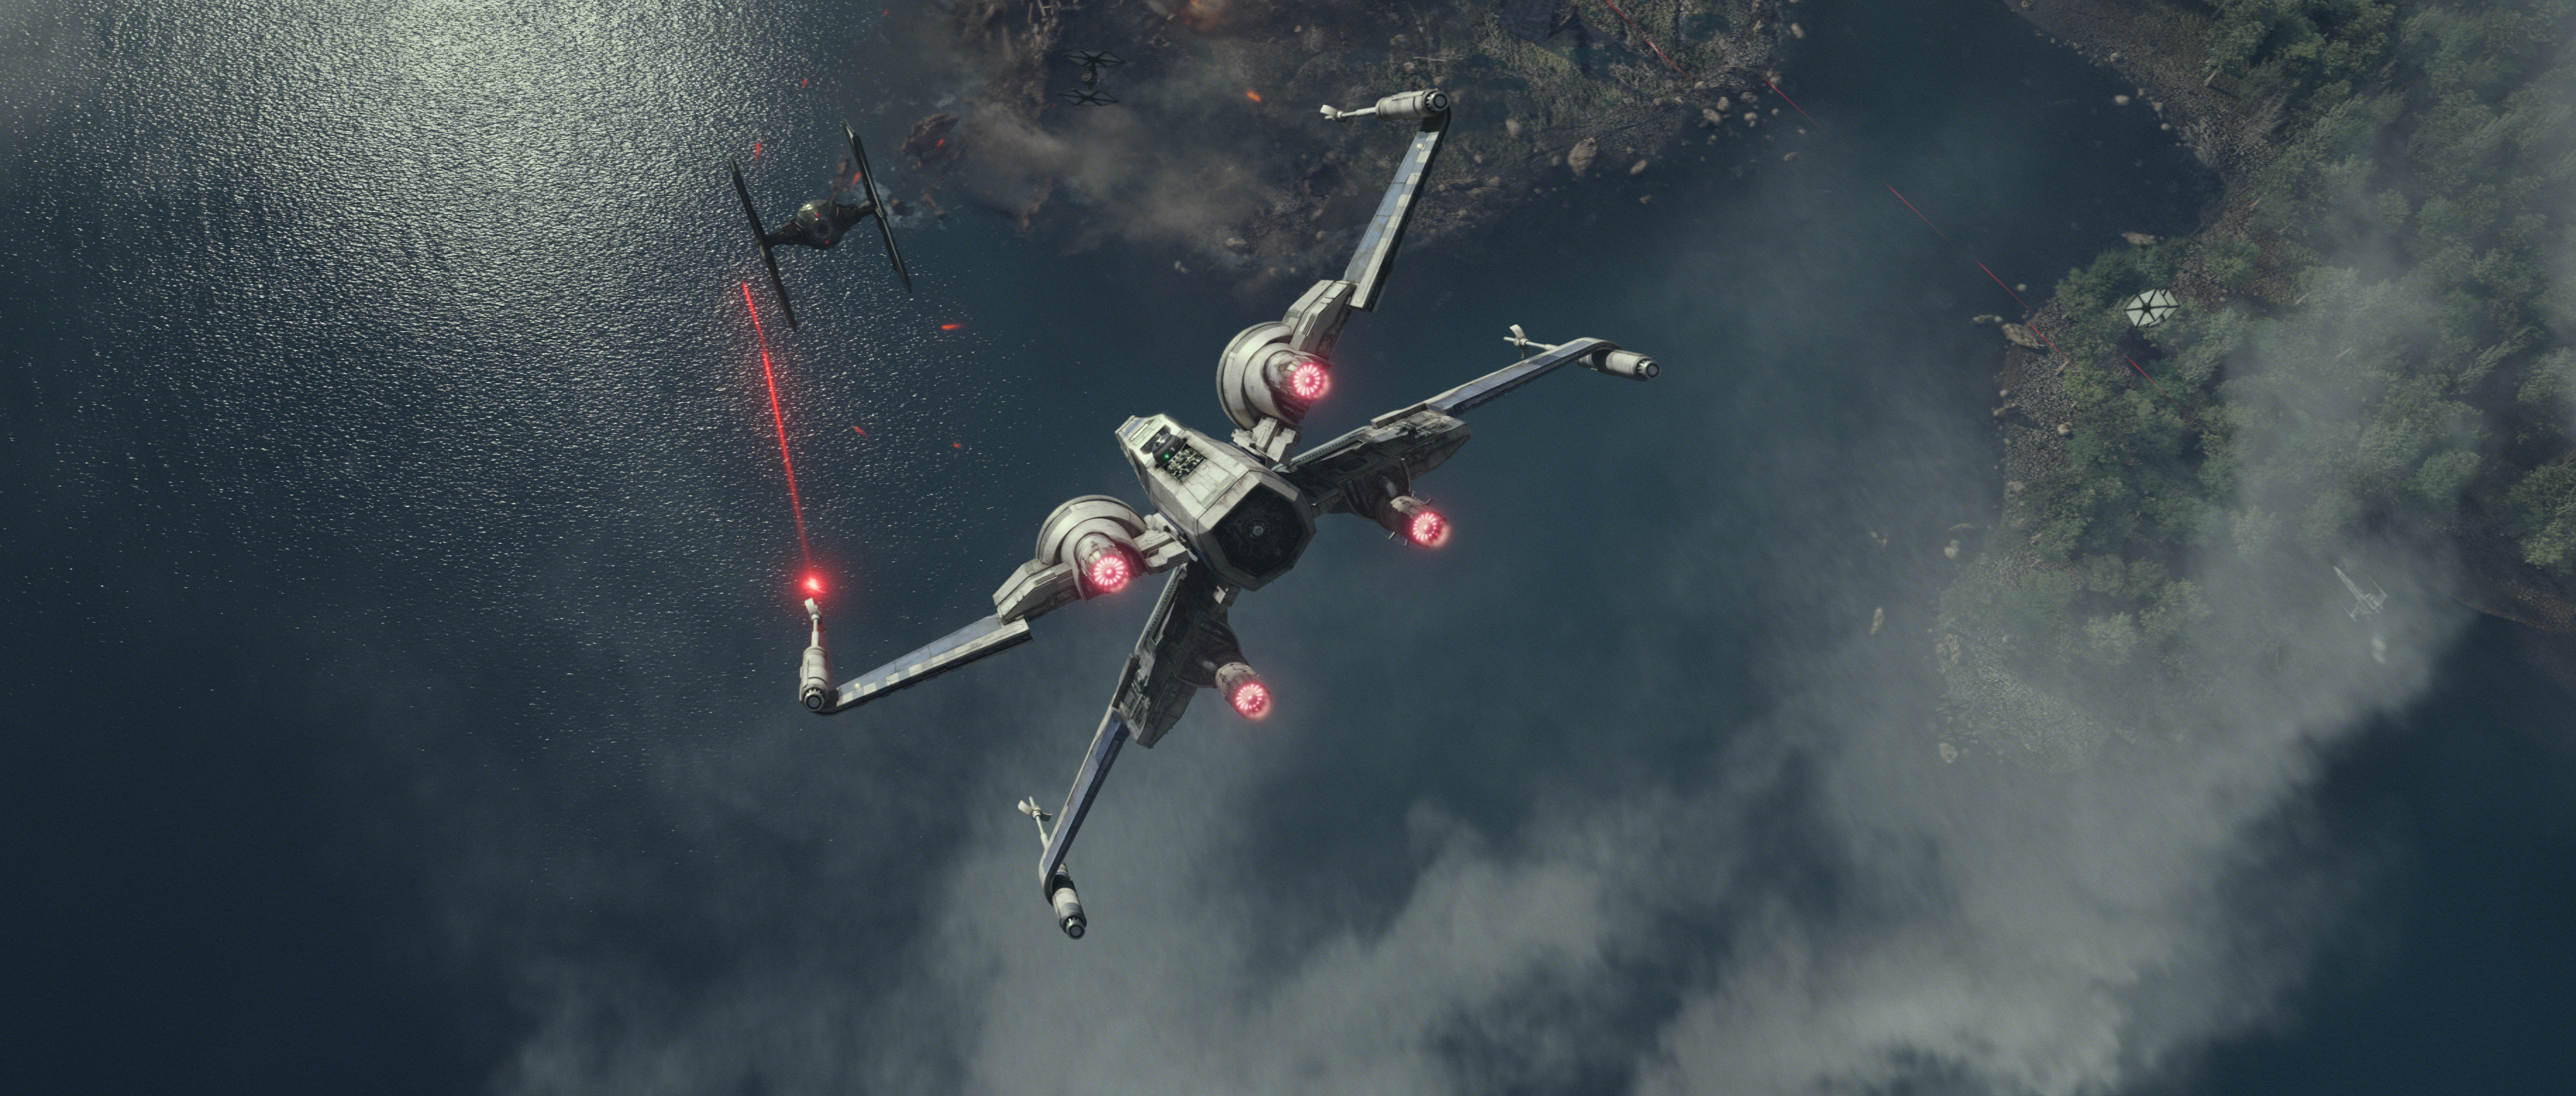 Star Wars The Force Awakens Hi Res Image Are Perfect For